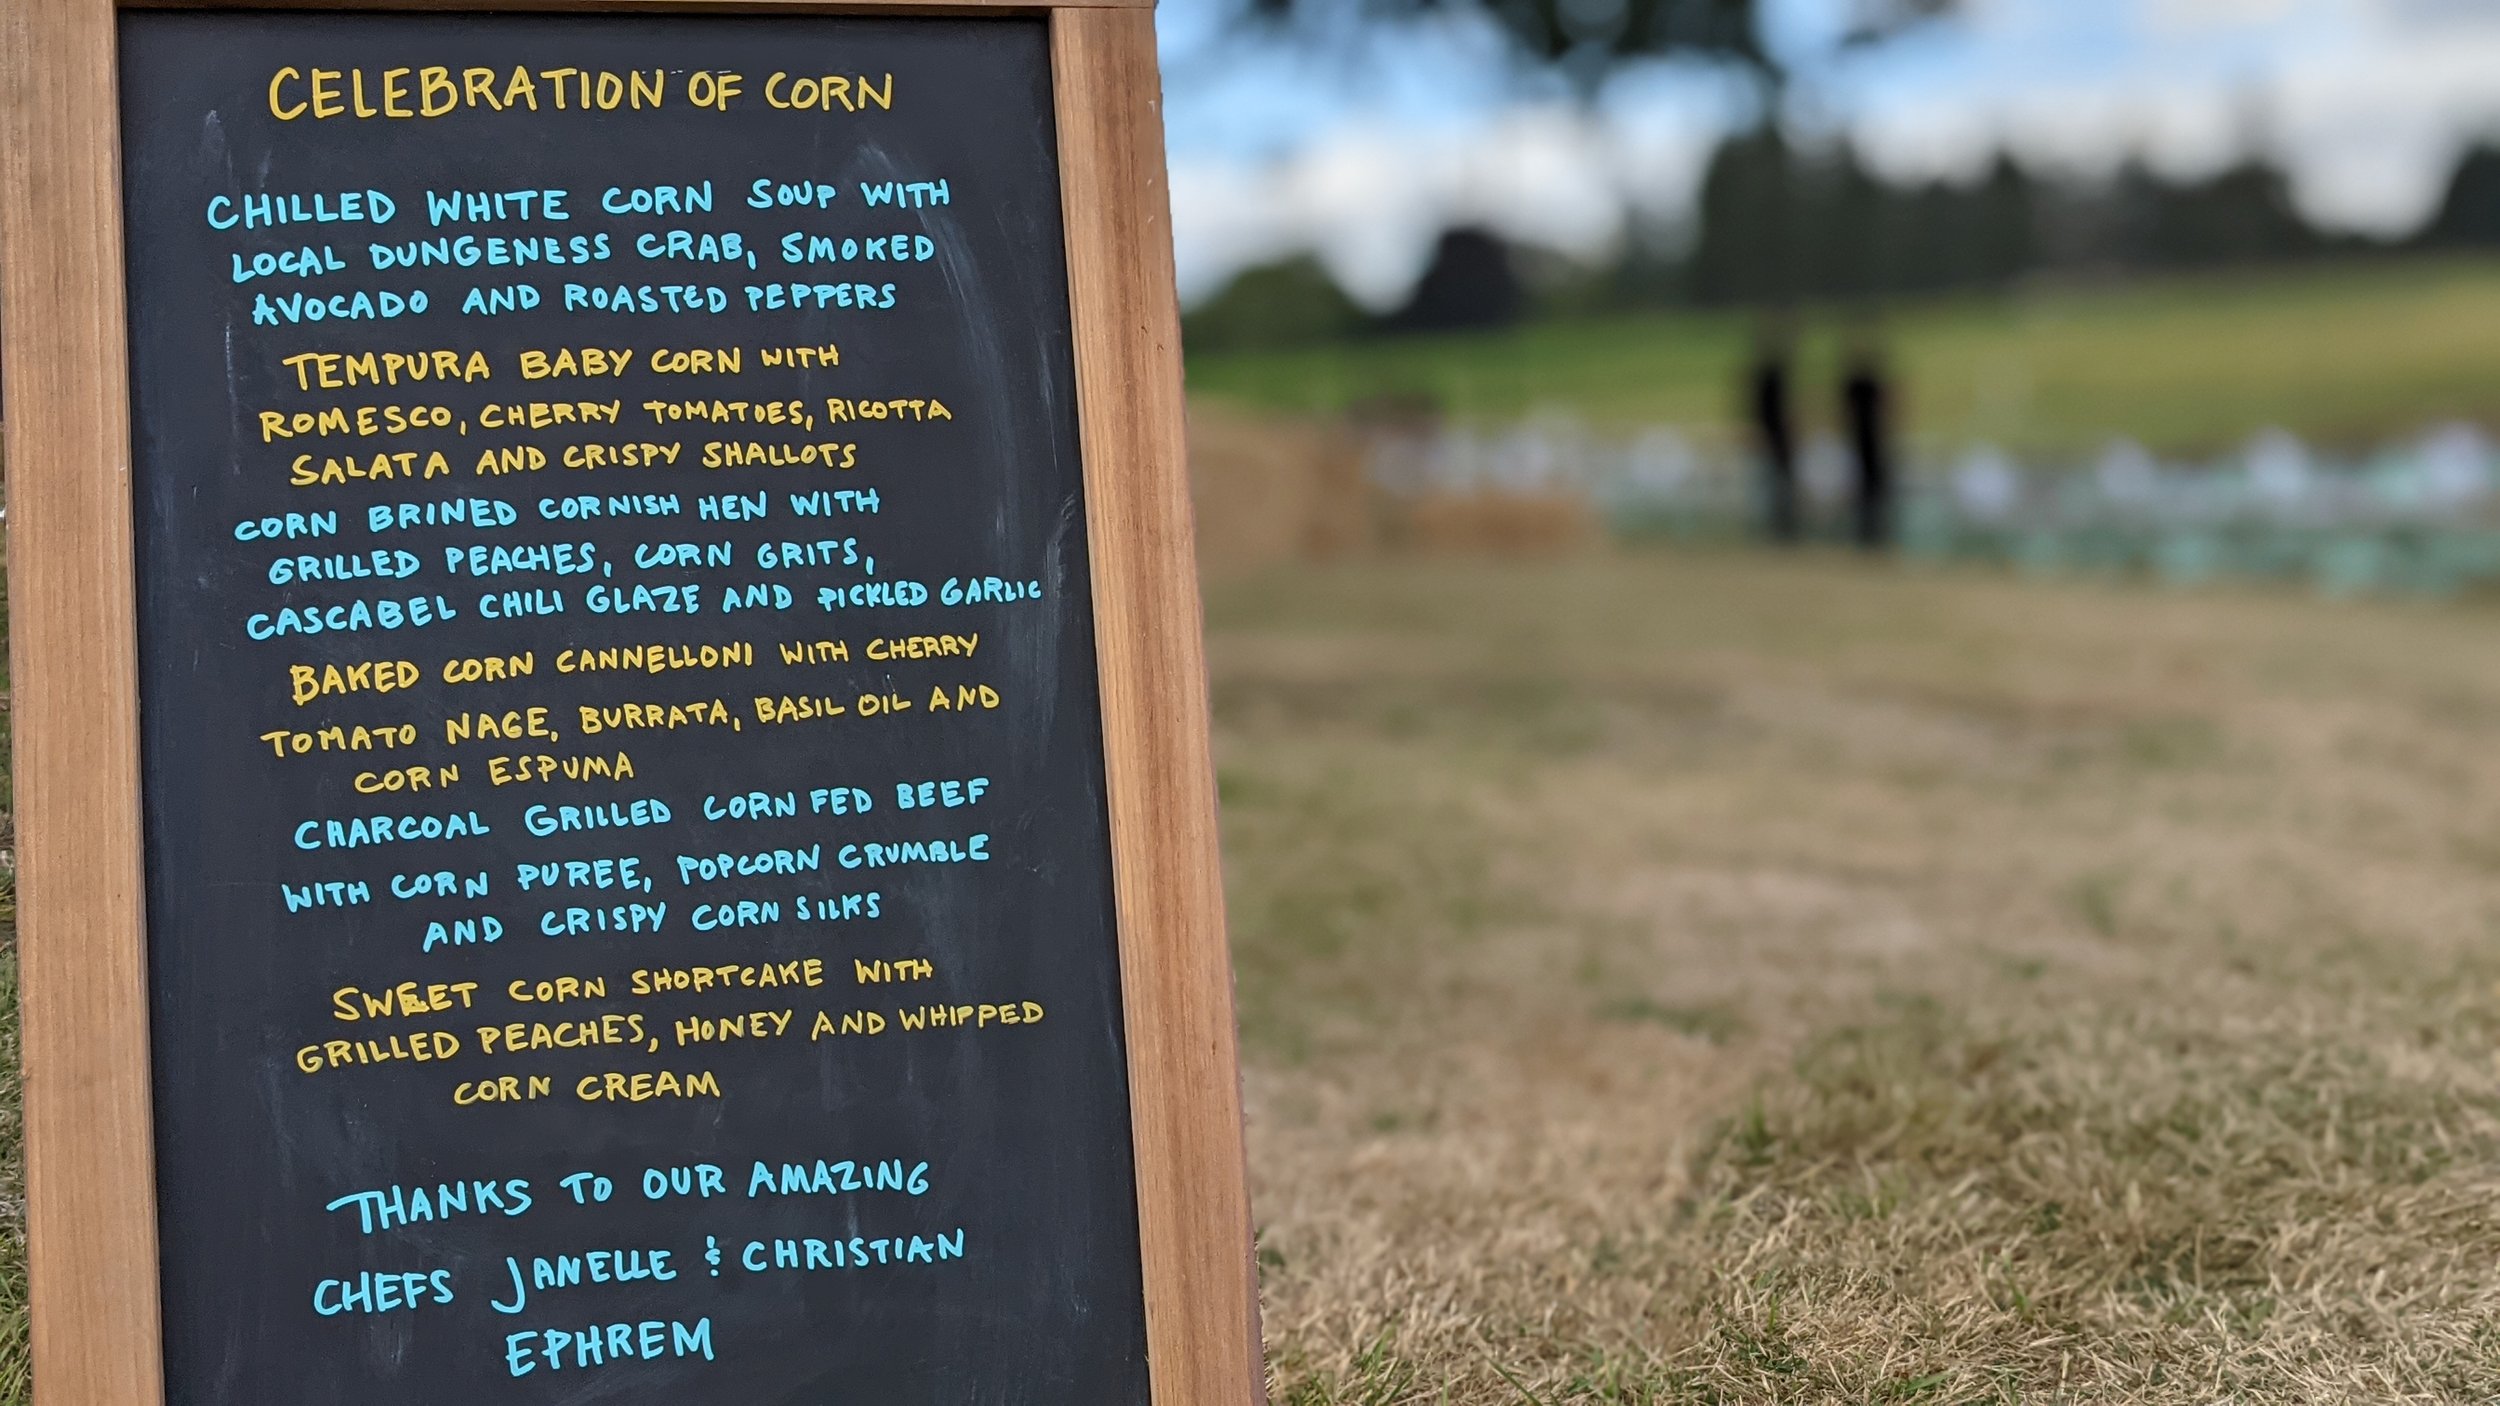  The menu from this year’s Celebration of Corn dinner. Each week the chefs create a unique menu based on what is being harvested on the farm. 